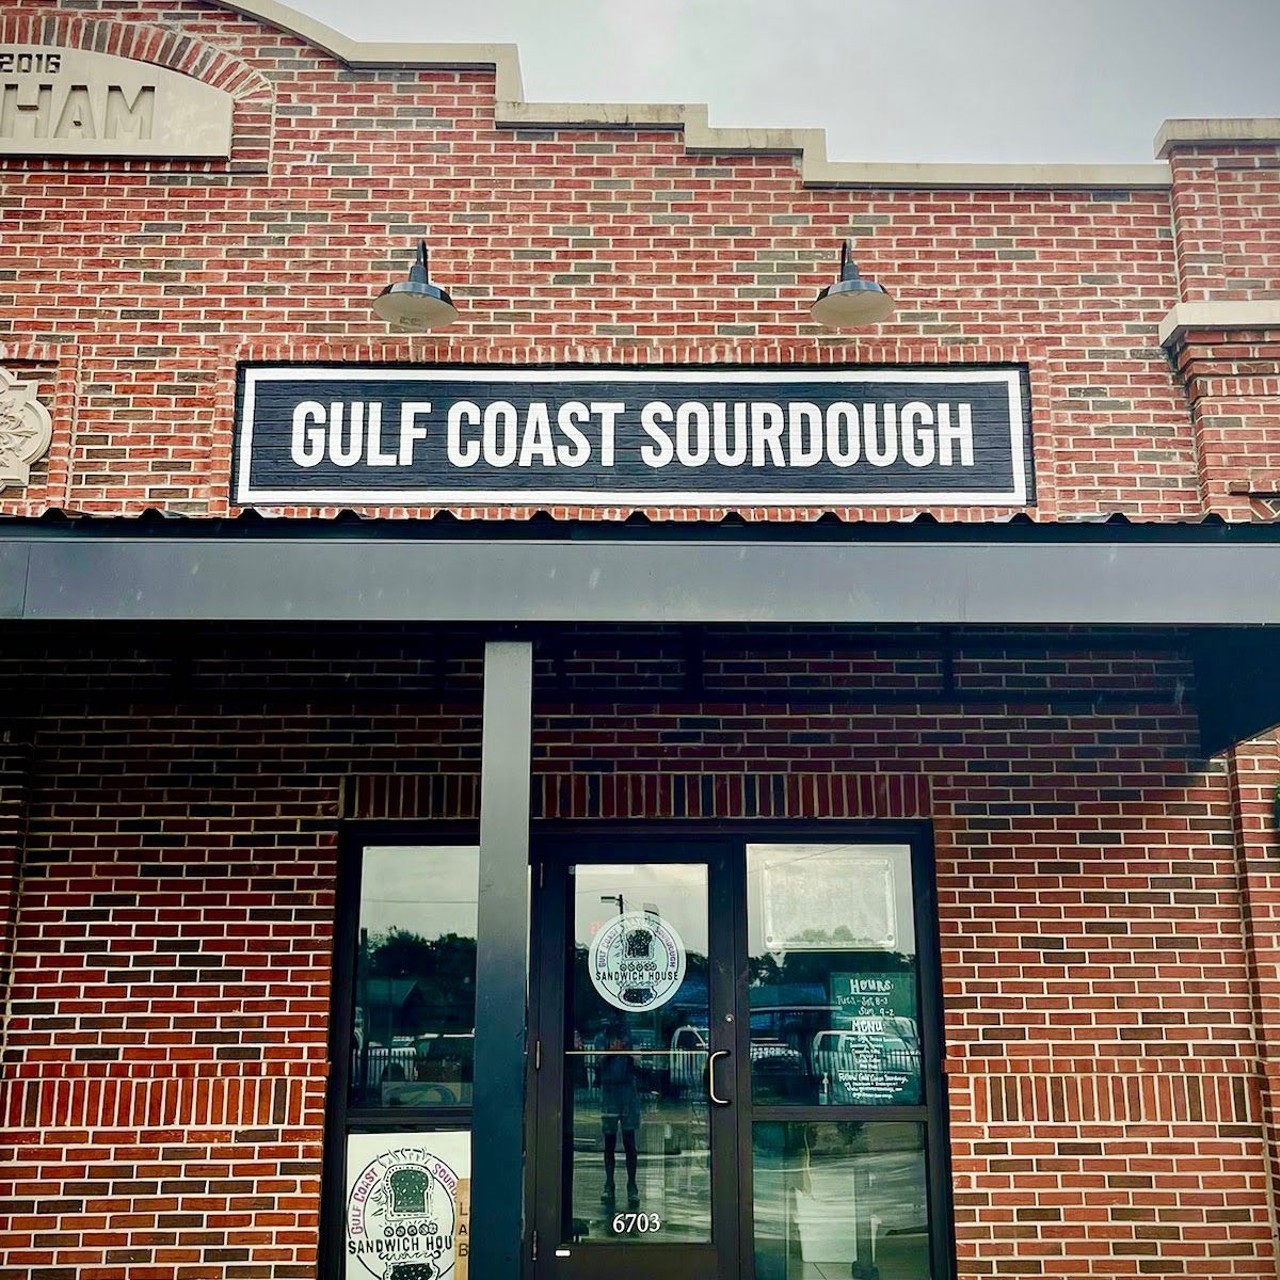 Gulf Coast Sourdough Sandwich House
6703 N Florida Ave., Tampa, 813-304-1294
In between the fabulous Meketina and an ice cream shop, Gulf Coast Sourdough Sandwich House serves Tampa-style pressed breakfast and lunch sandwiches in which the owners combine old-fashioned techniques with modern tastes to produce flavor, texture, and character in every food item they make. Take a flyby to eat in the car on the way home, too.
Photo via Gulf Coast Sourdough Sandwich House/Facebook